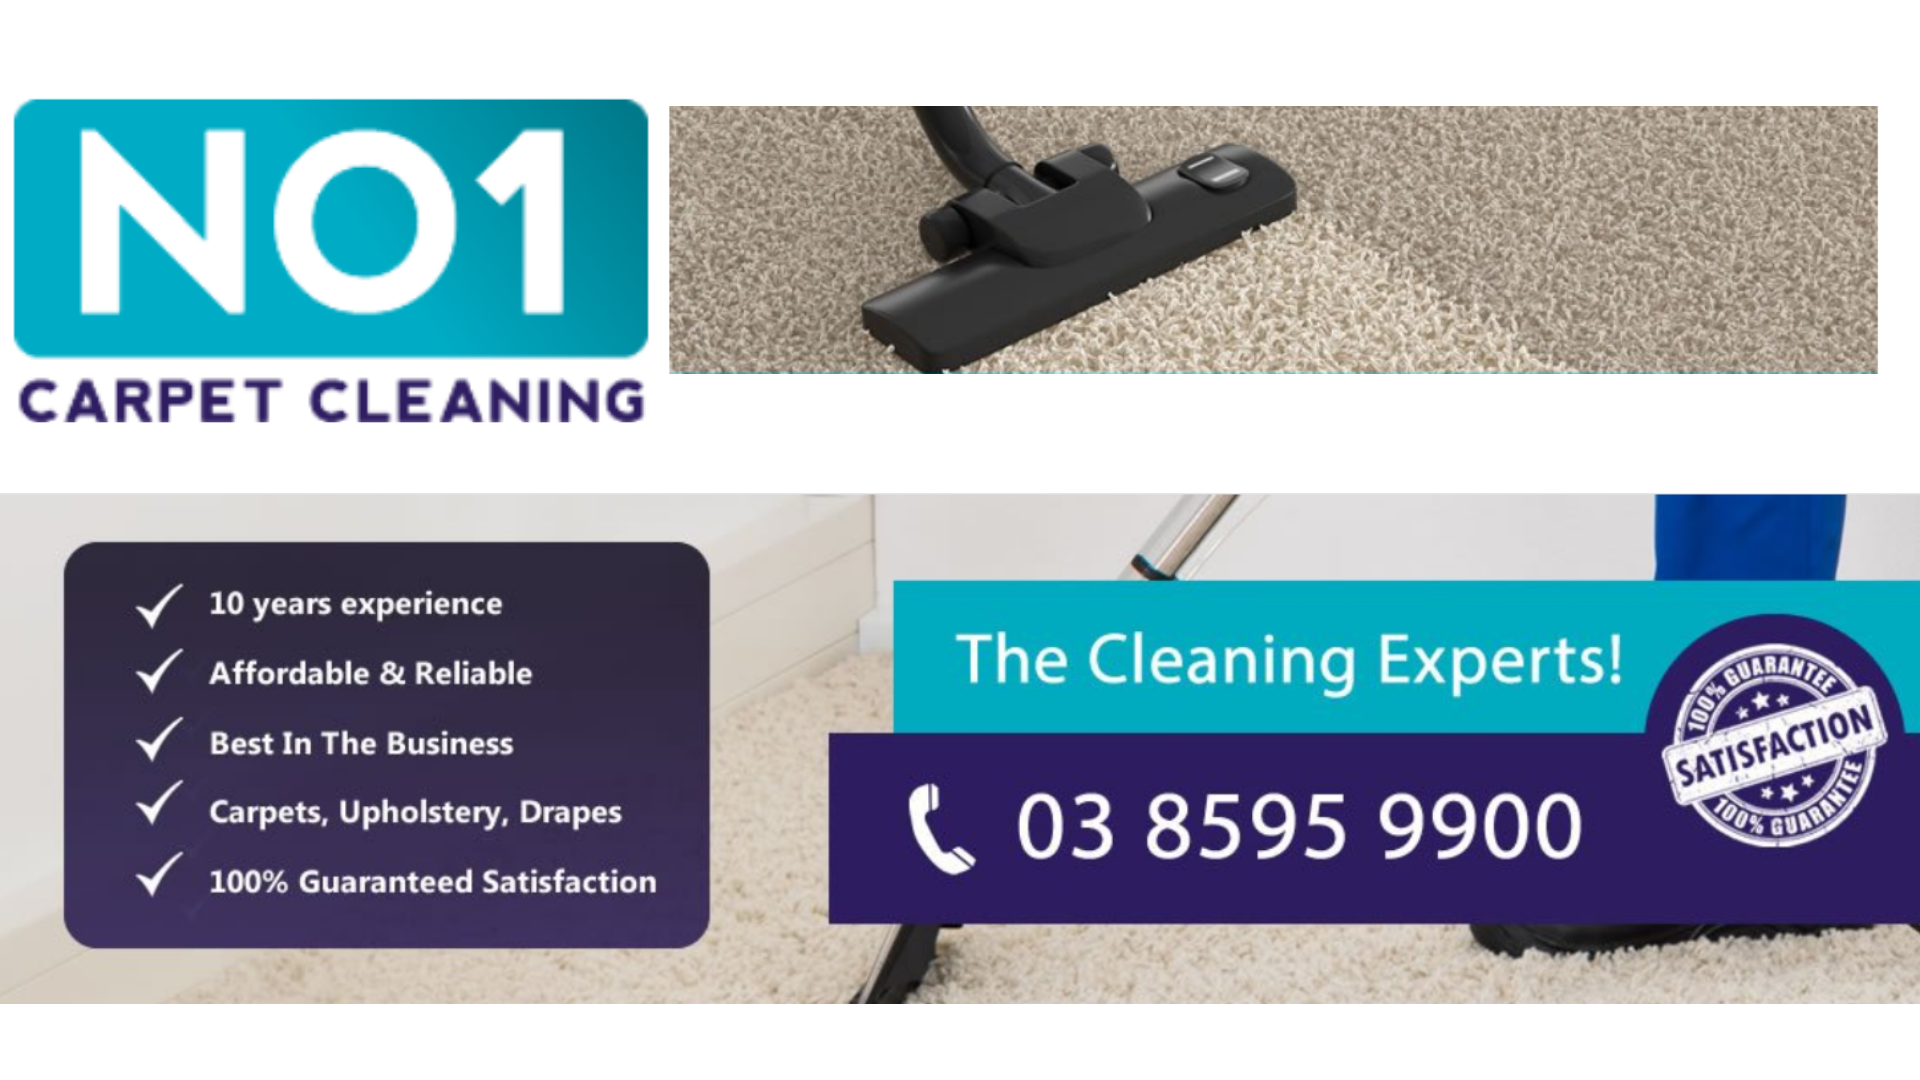 Welcome to NO1 Carpet Cleaning Melbourne'